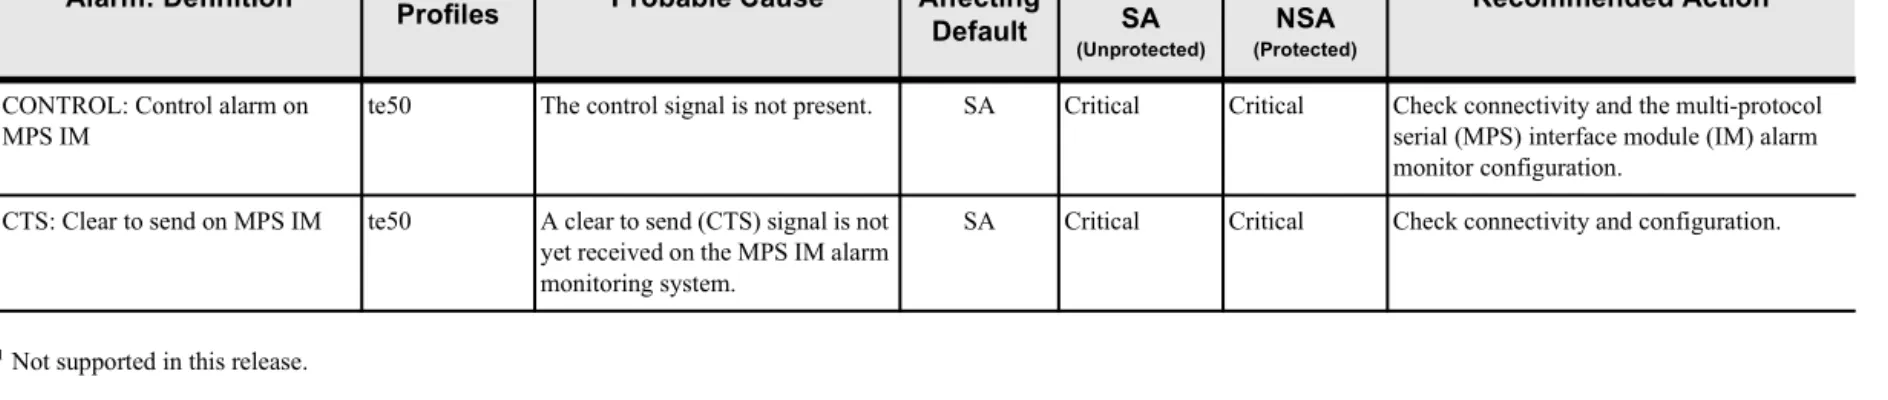 Table 1-8  Alarms, Events and Recommended Actions, A through C (continued)